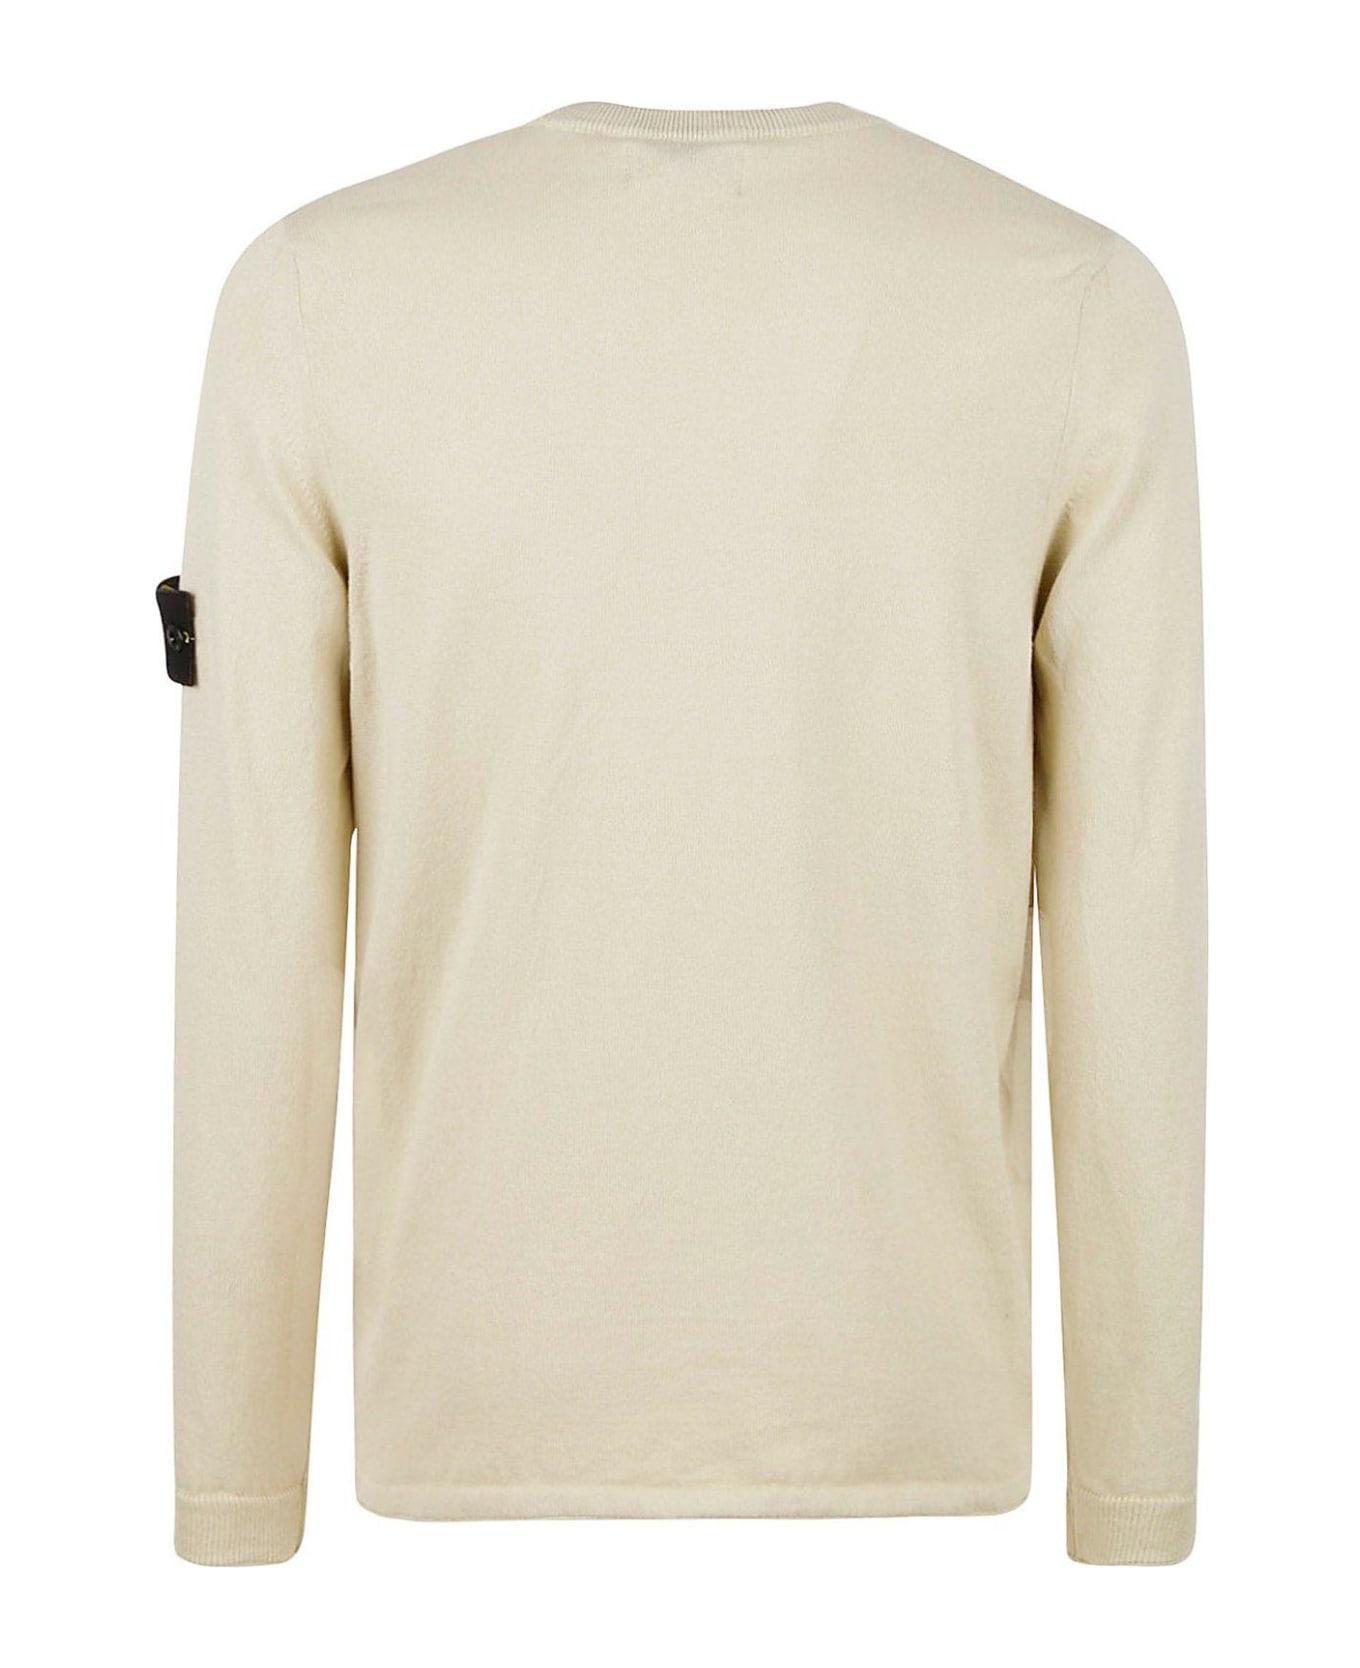 Stone Island Compass Patch Crewneck Knitted Jumper - Beige